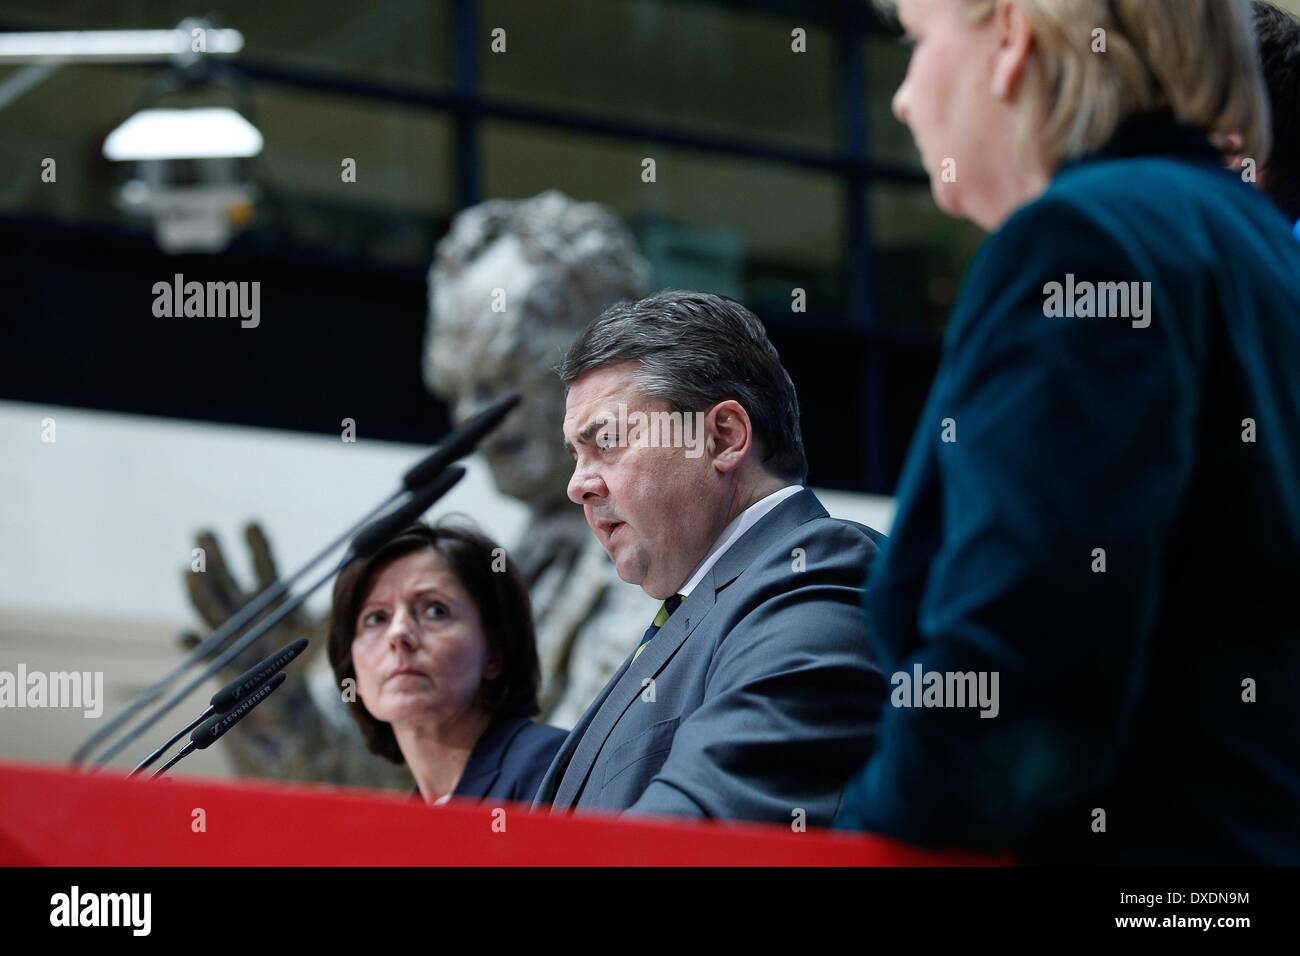 Berlin, Germany. 24th Mar, 2014. Statement on energy policy with Sigmar Gabriel, SPD Chief and Miniter of Economy, and Hannelore Kraft, Minister-President of North Rhine-Westphalia, and Malu Dreyer, Minister-President of Rhineland-Palatinate, and the Deputy Prime Minister of Baden-WÃƒÆ’Ã‚Â¼rttemberg Nils Schmid at Willy-Brandt-Haus in Berlin./Picture: Sigmar Gabriel, SPD Chief and Miniter of Economy, and Hannelore Kraft, Minister-President of North Rhine-Westphalia, and Malu Dreyer, Minister-President of Rhineland-PalatinateBerlin, Germany. Mars 24th, 2014.Statement on energy policy with S Stock Photo